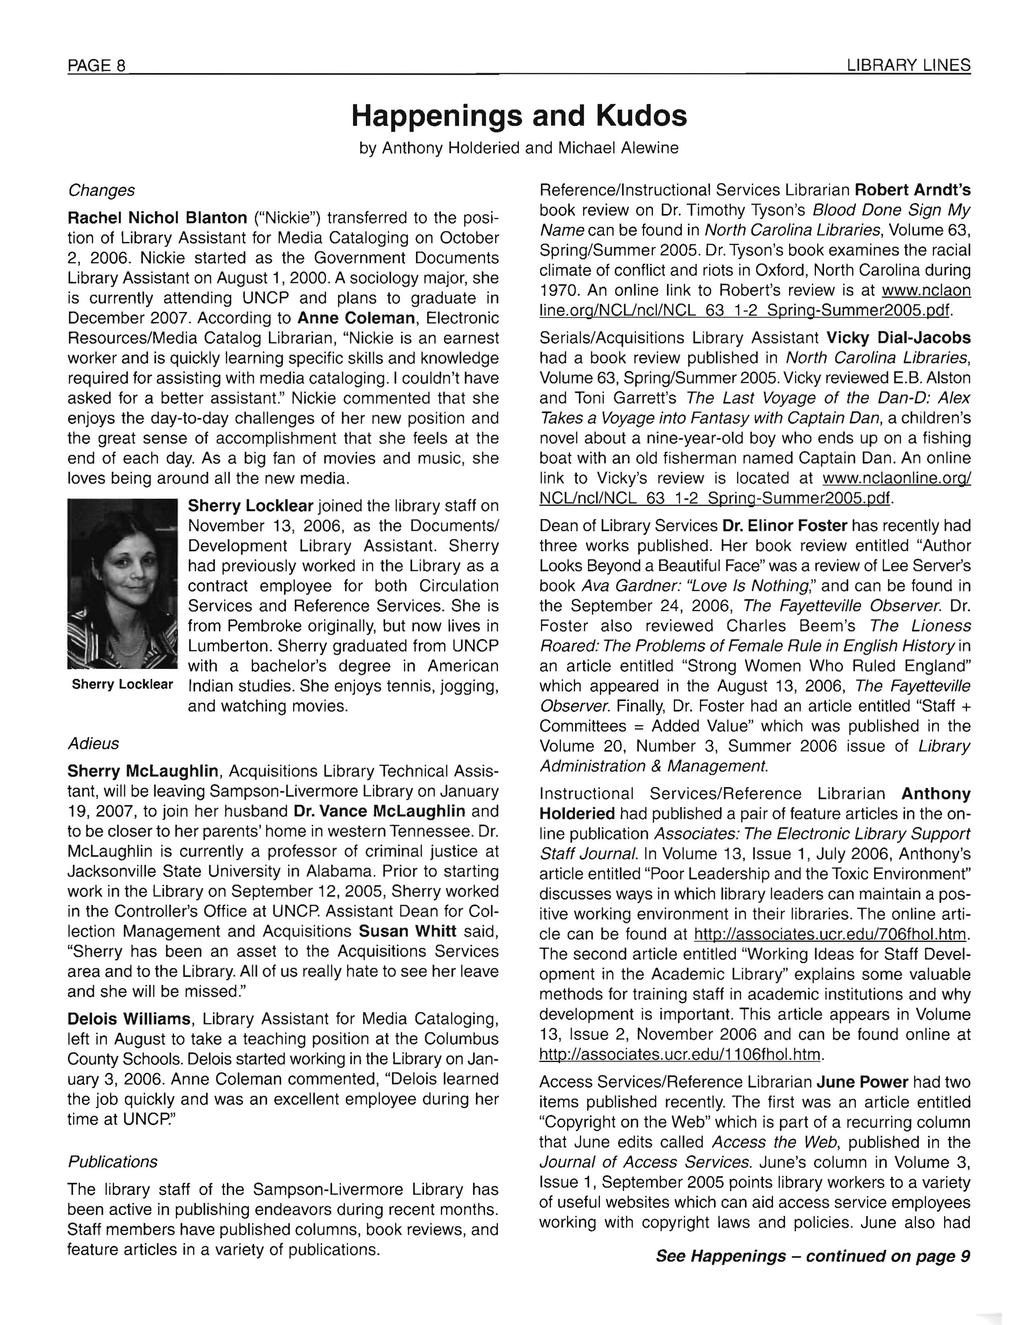 PAGE 8 LIBRARY LINES Happenings and Kudos by Anthony Holderied and Michael Alewine Changes Rachel Nichol Blanton ("Nickie") transferred to the position of Library Assistant for Media Cataloging on